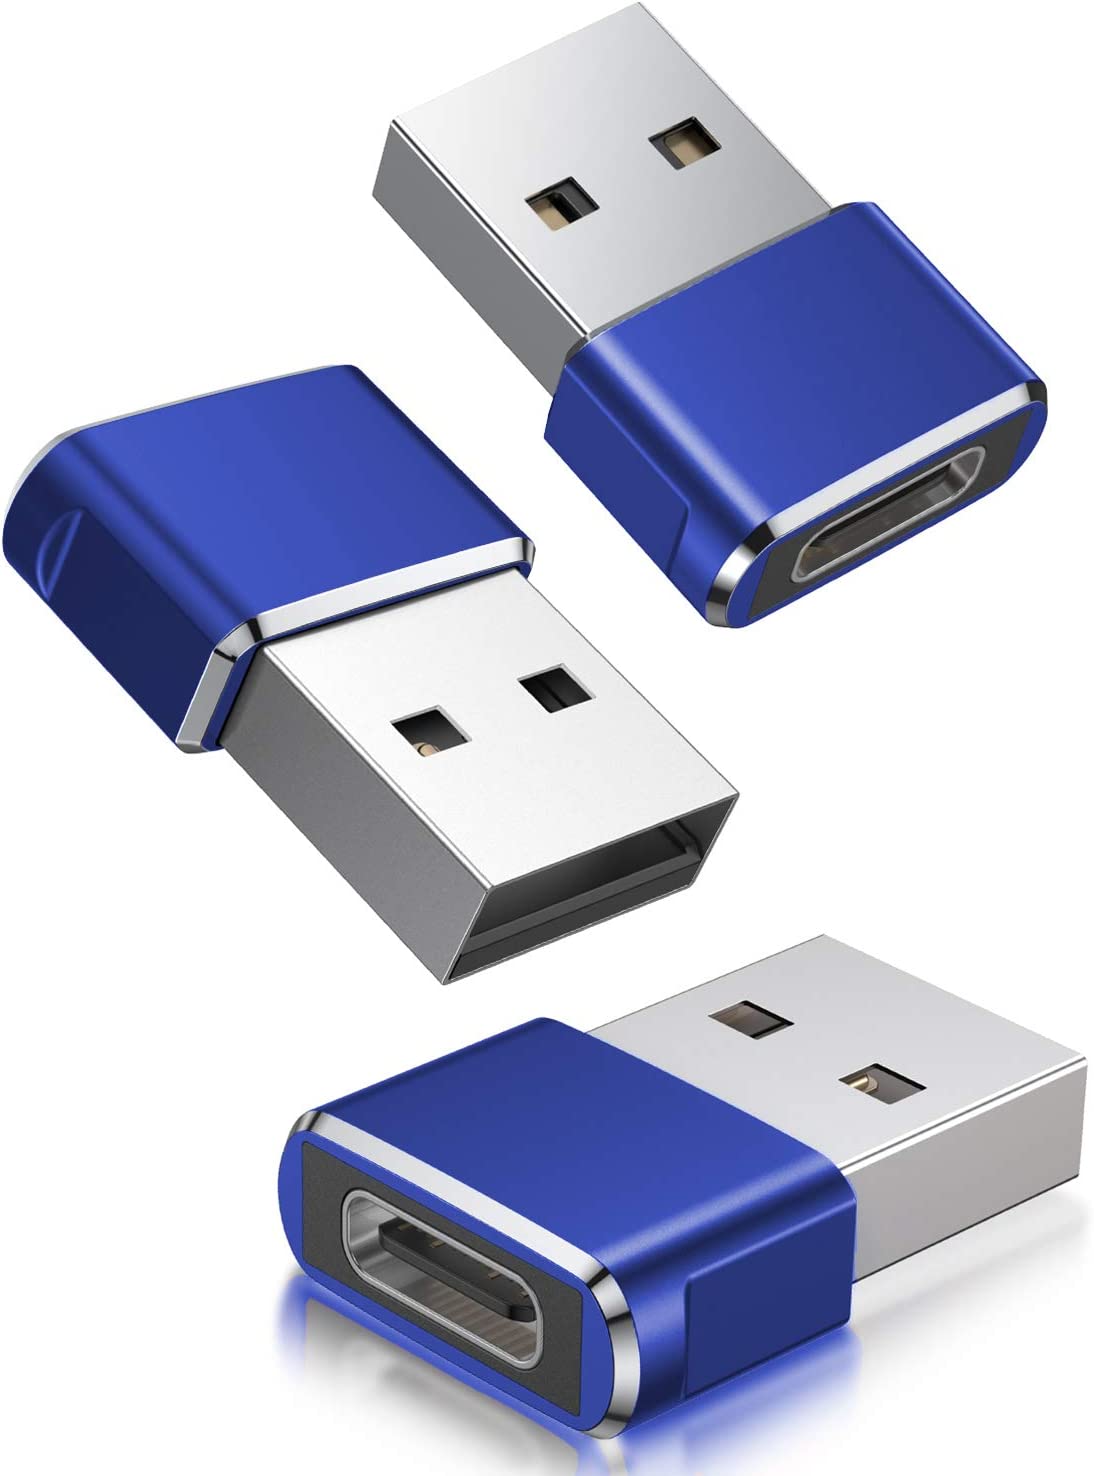 USB to USB Adapters